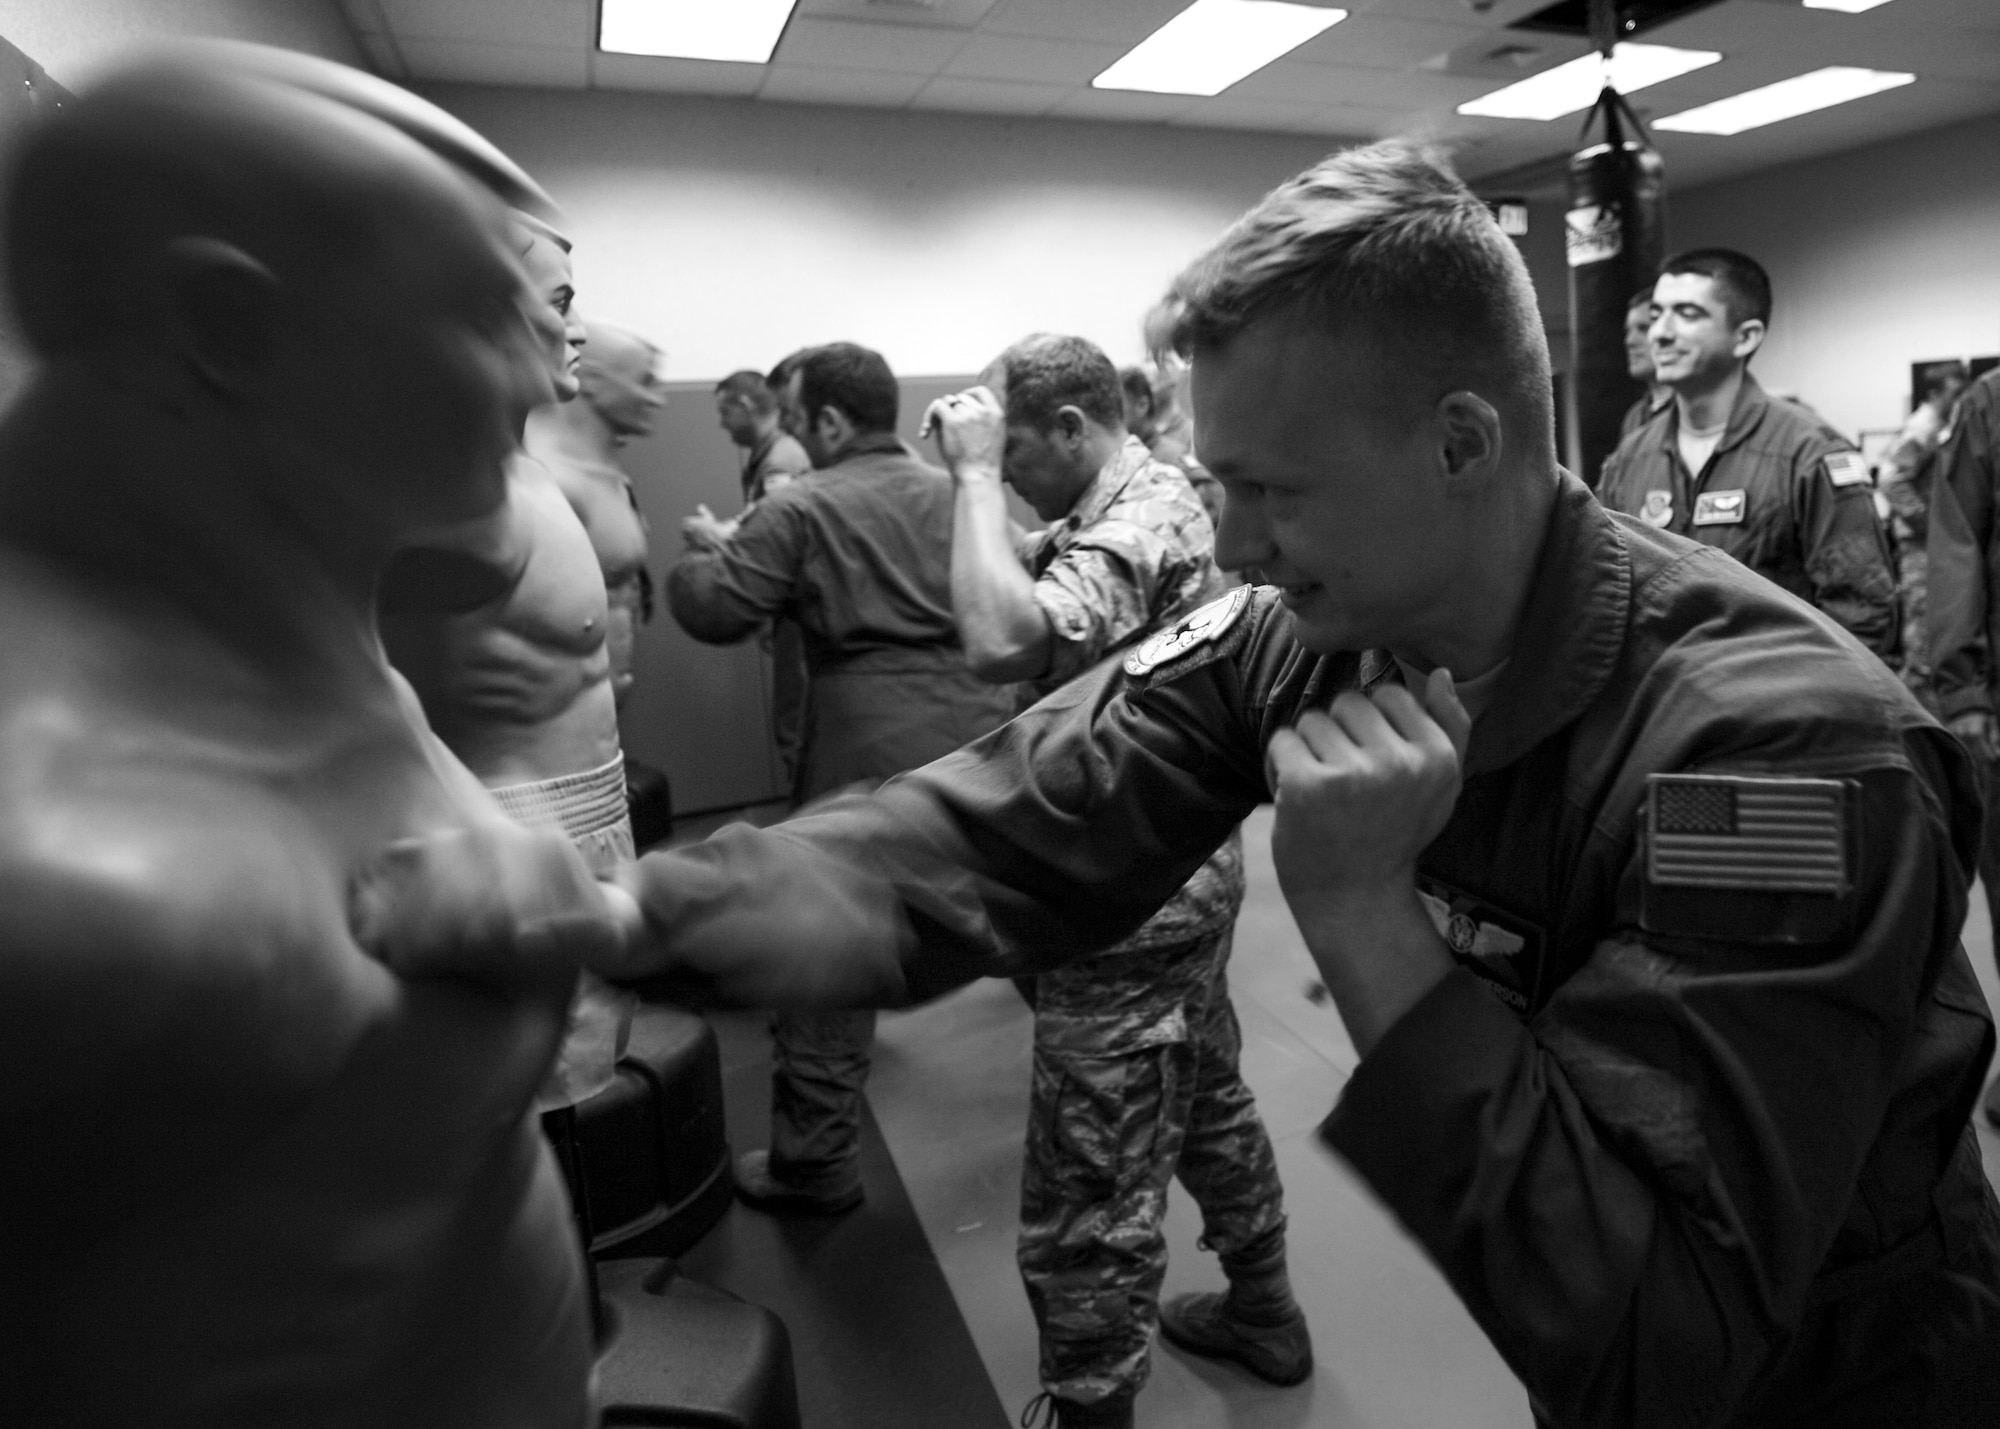 U.S. Air Force Senior Airman Dustin Thomerson, 41st Airlift Squadron C-130J loadmaster, demonstrates self-defense tactics June 21, 2016, at Little Rock Air Force Base, Ark. All aircrew members learn basic self-defense measures to prevent death or severe injury. (U.S. Air Force photo by Senior Airman Harry Brexel)